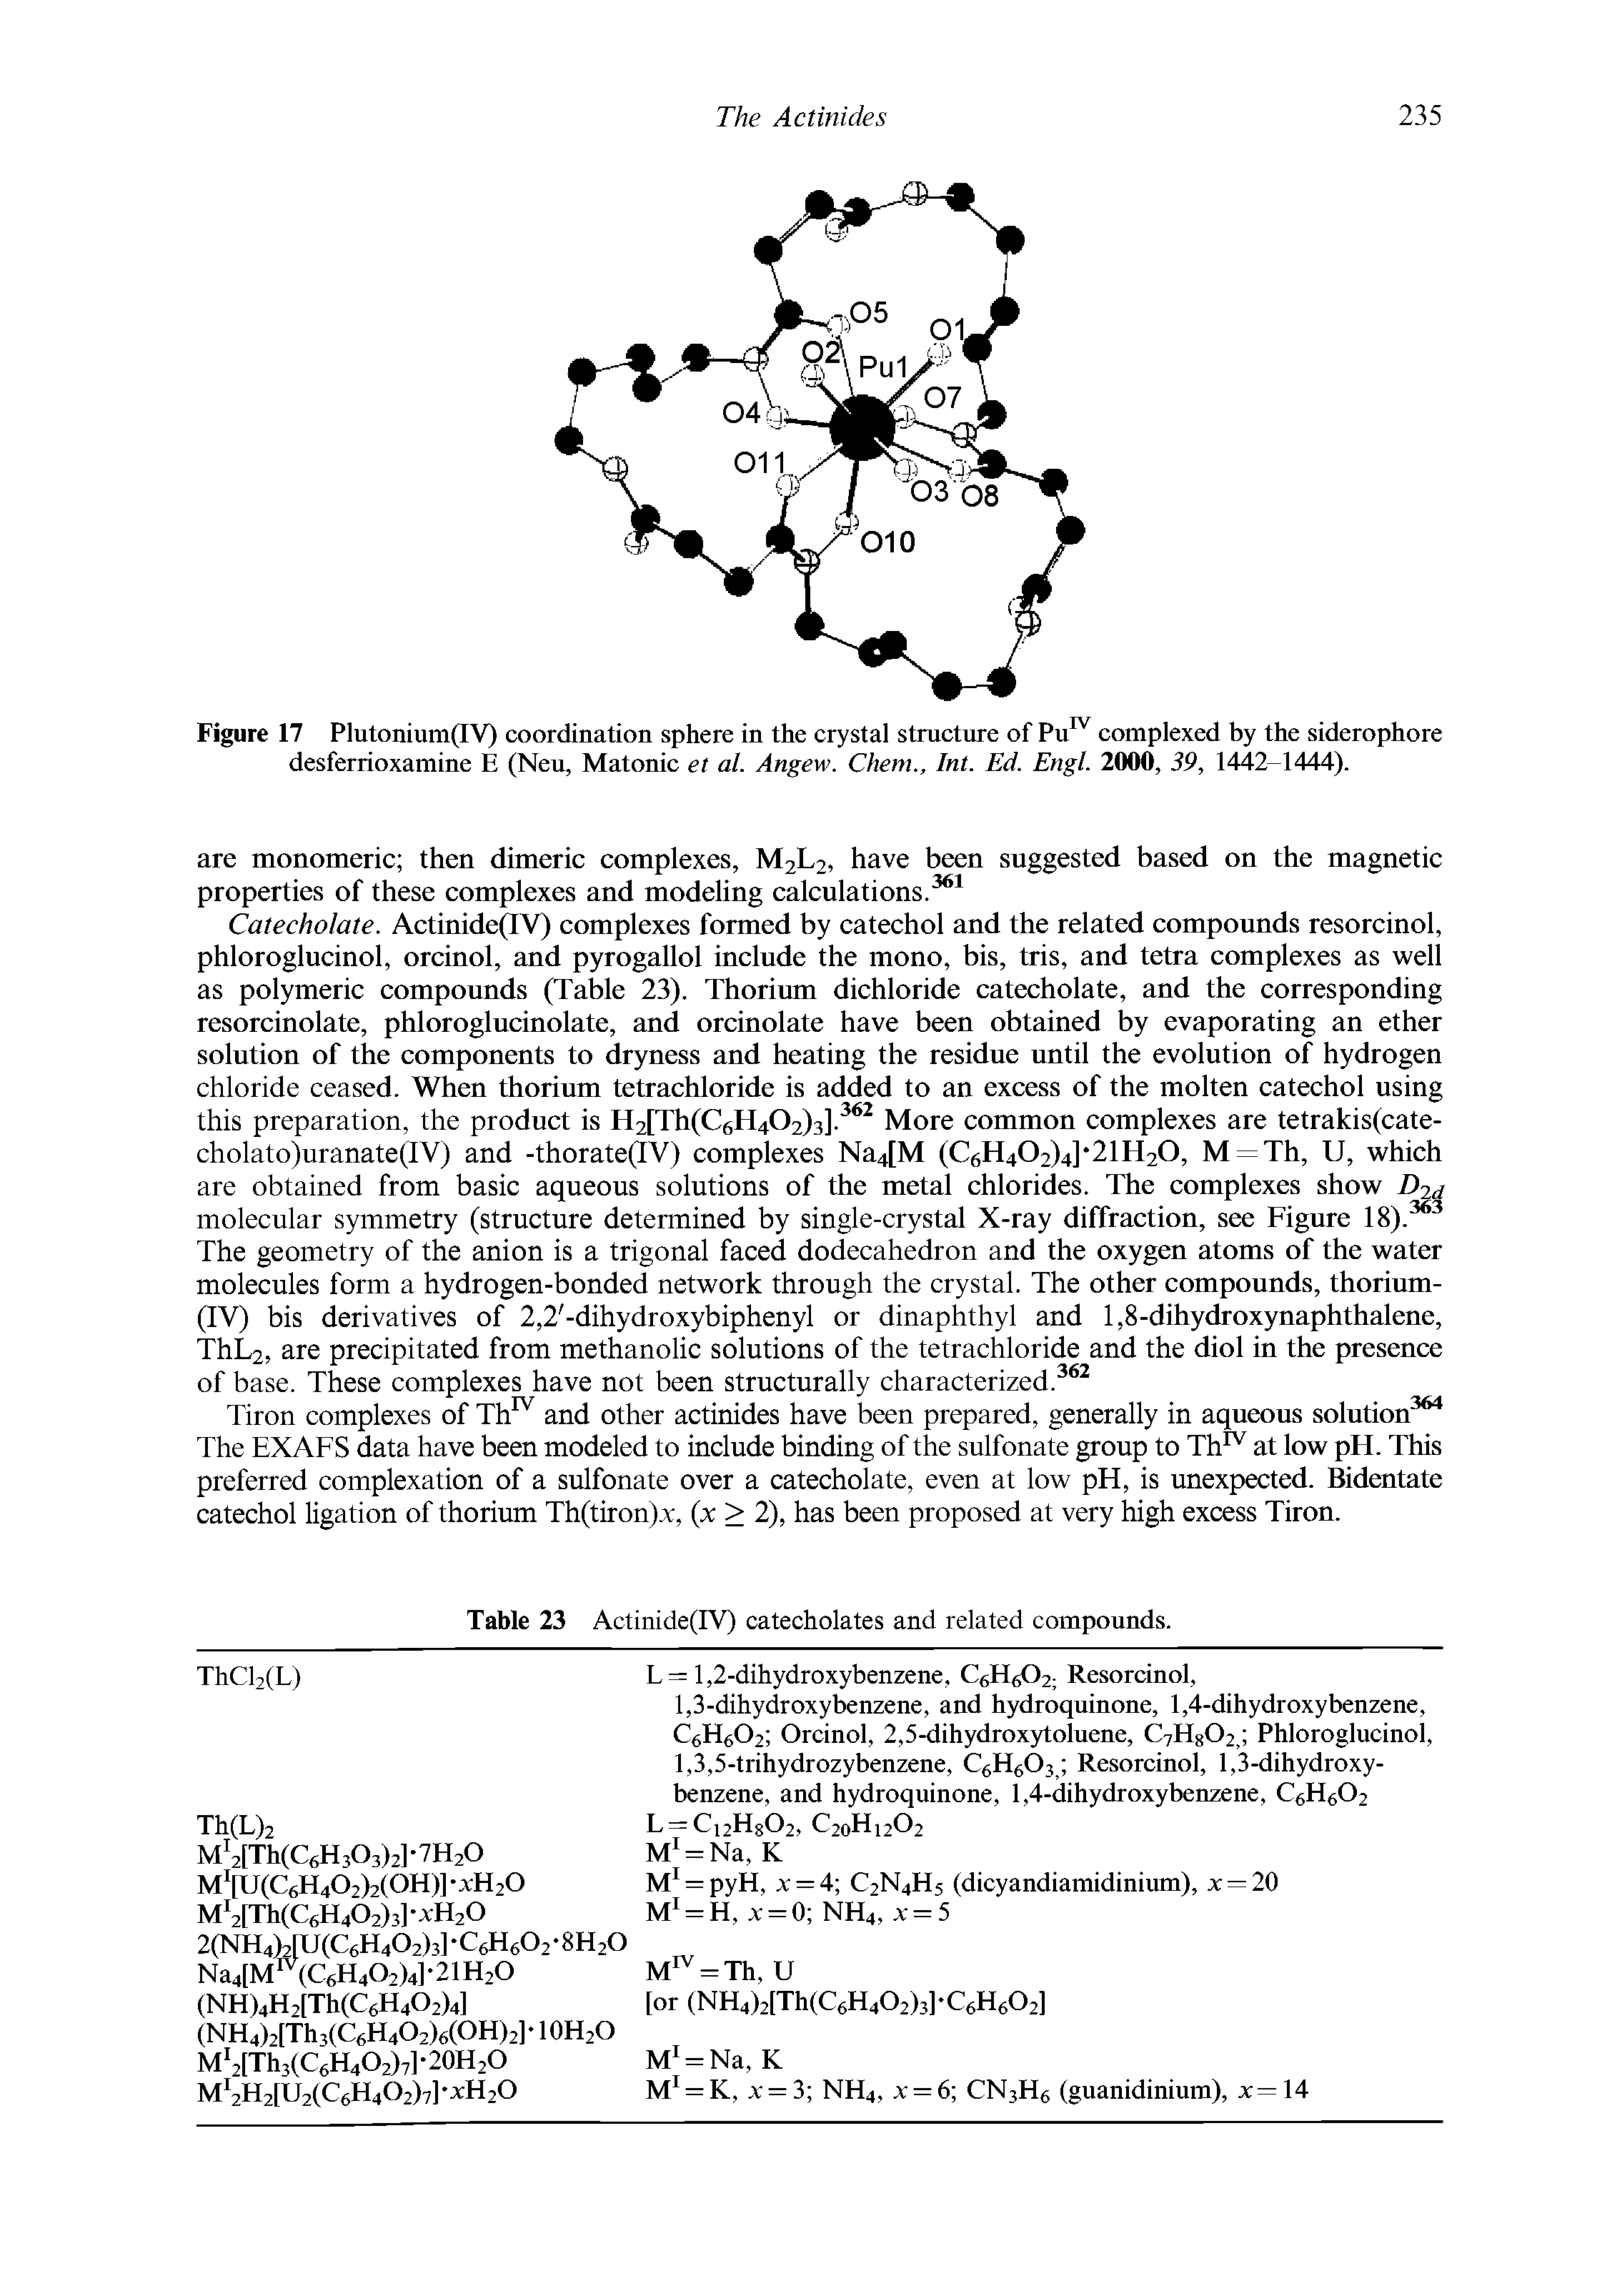 Figure 17 Plutonium(IV) coordination sphere in the crystal structure of complexed by the siderophore desferrioxamine E (Neu, Matonic et al. Angew. Chem., Int. Ed. Engl. 2000, 39, 1442-1444).